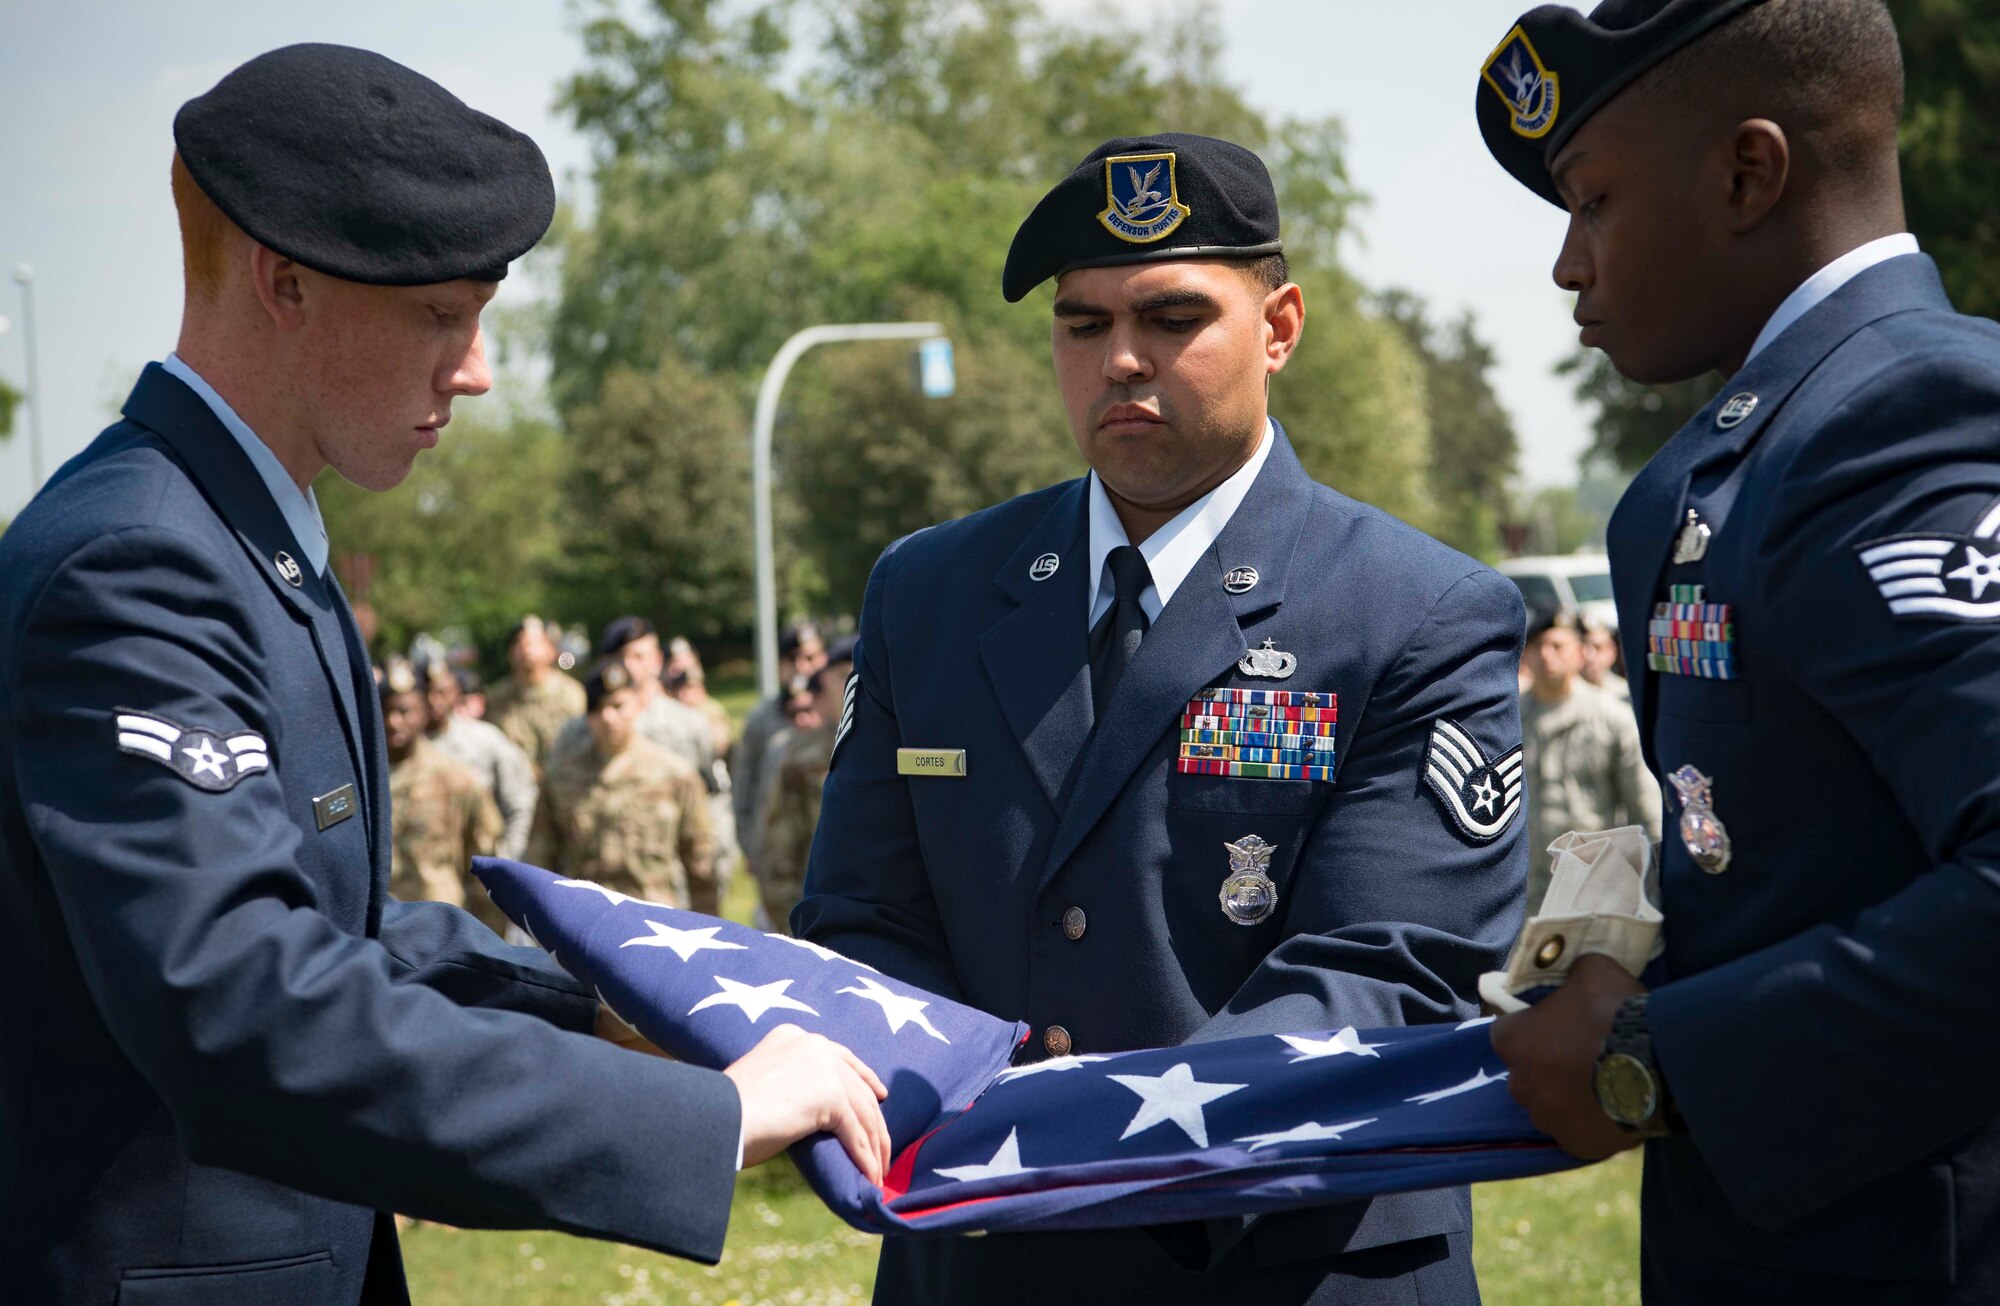 U.S. Airmen fold an American flag in recognition of fallen U.S. armed forces police services members during a Police Week 2018 retreat ceremony on Vogelweh Air Station, Germany, May 18, 2018. Airmen retired the flag according to yearly tradition, wherein they put the flag to rest to represent fallen police services personnel who have also been laid to rest. (U.S. Air Forces photo by Senior Airman Elizabeth Baker)